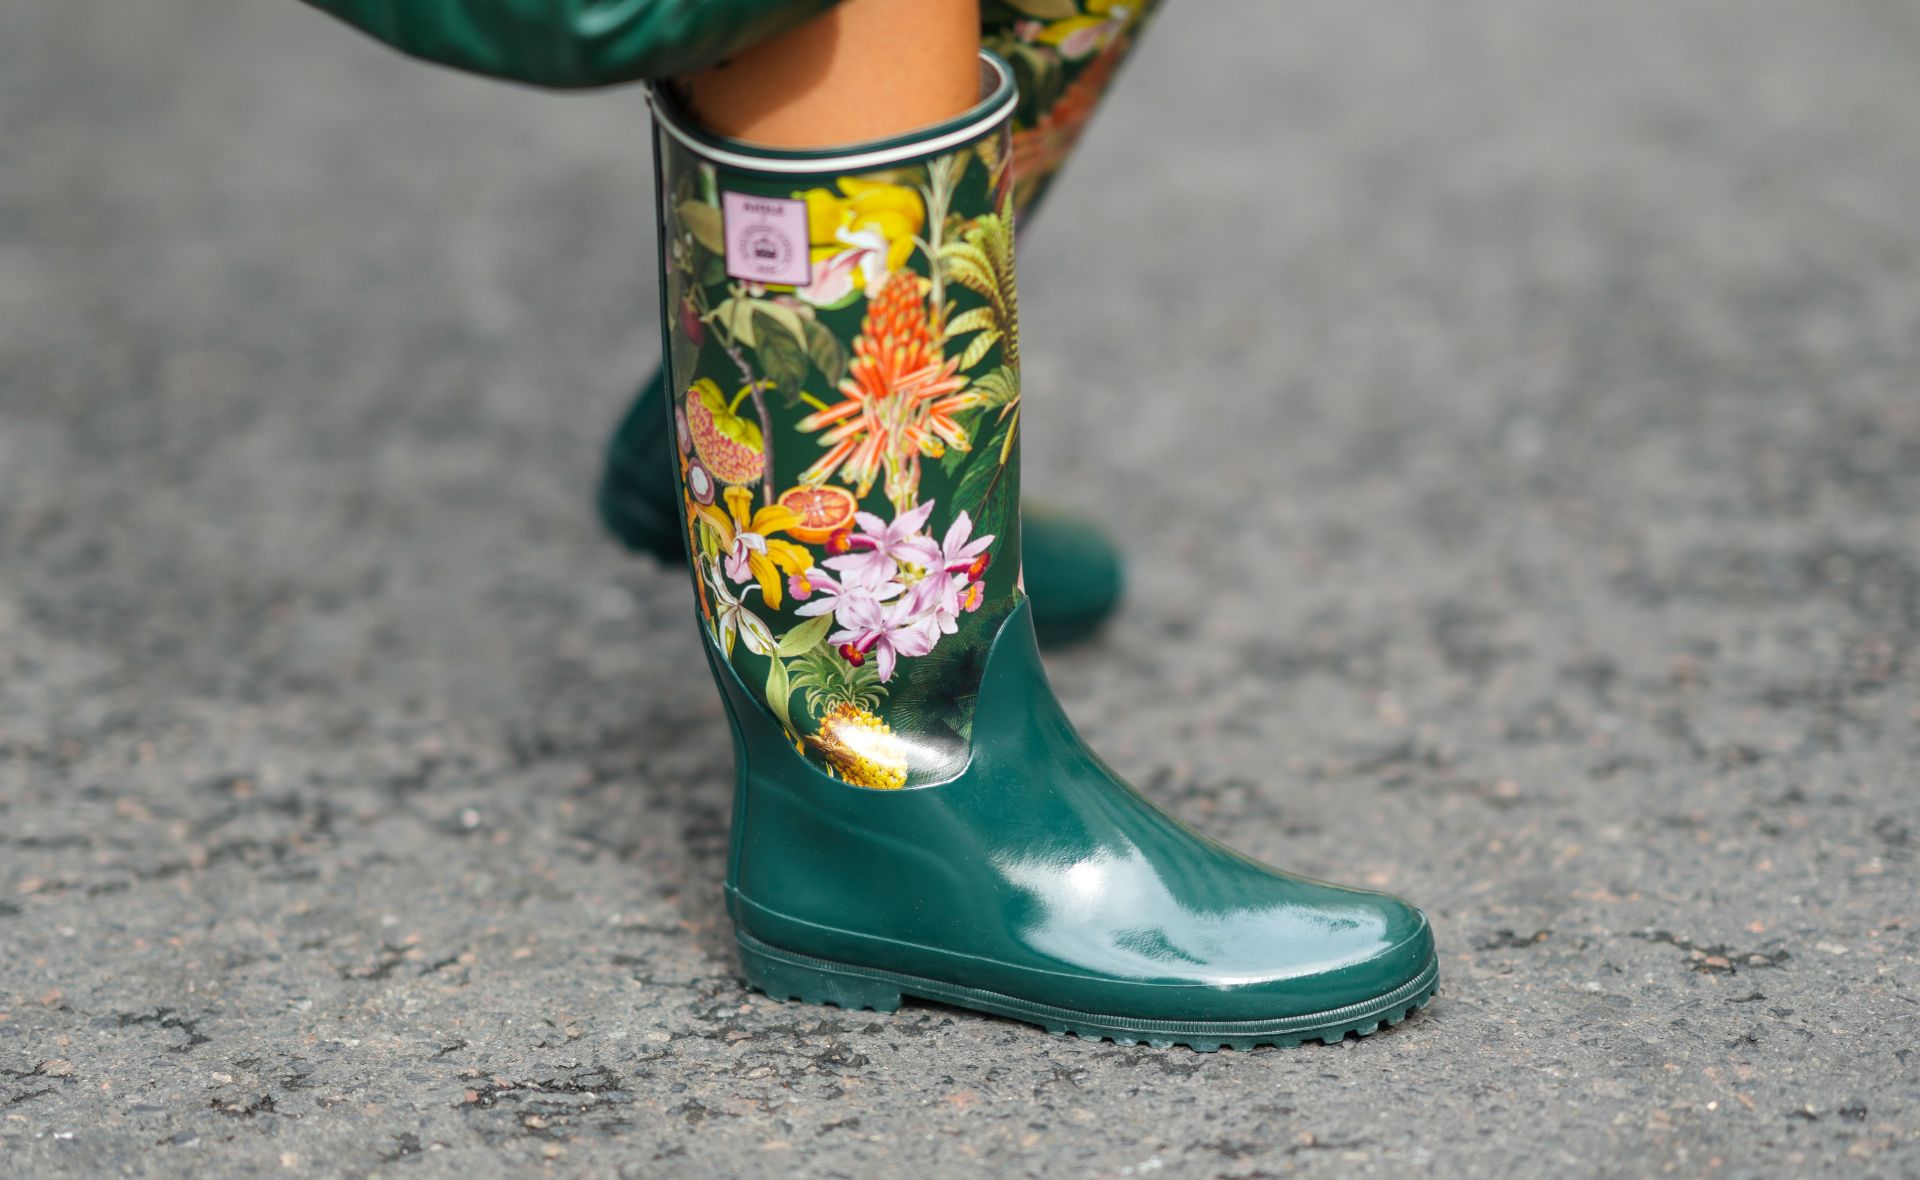 Get down and dirty in style with these chic gumboots